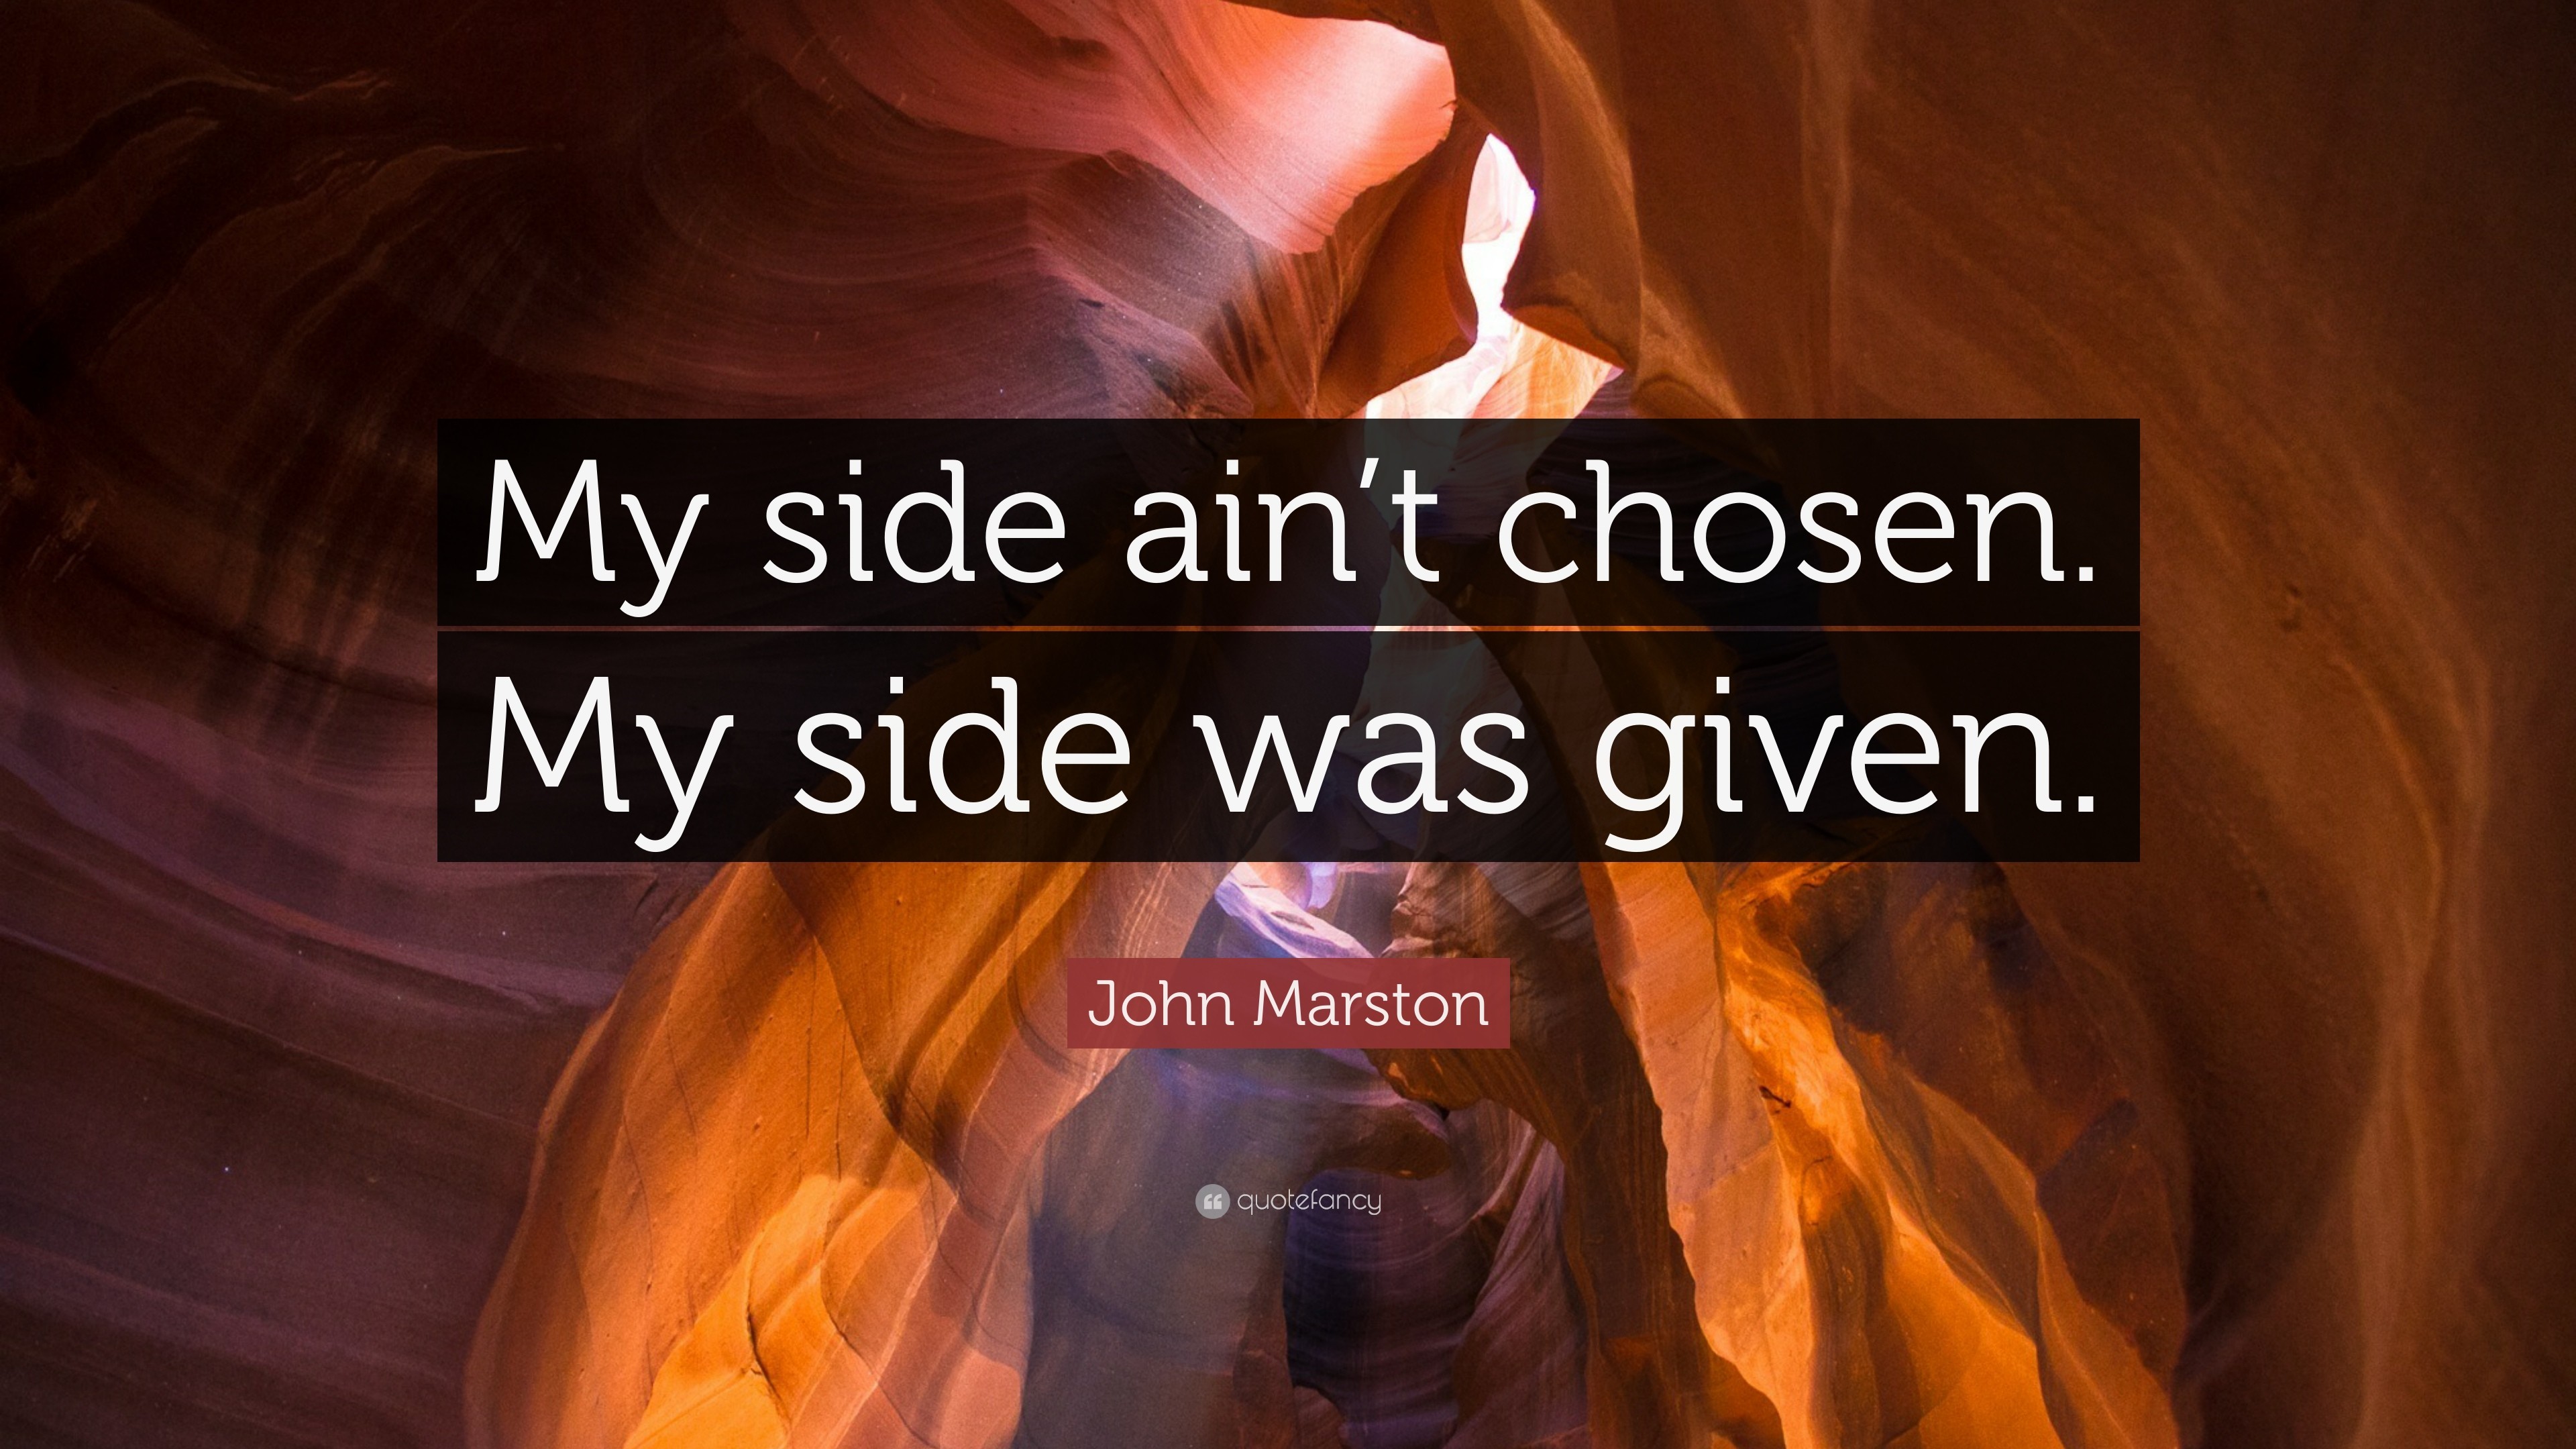 3840x2160 John Marston Quote: “My side ain't chosen. My side was given